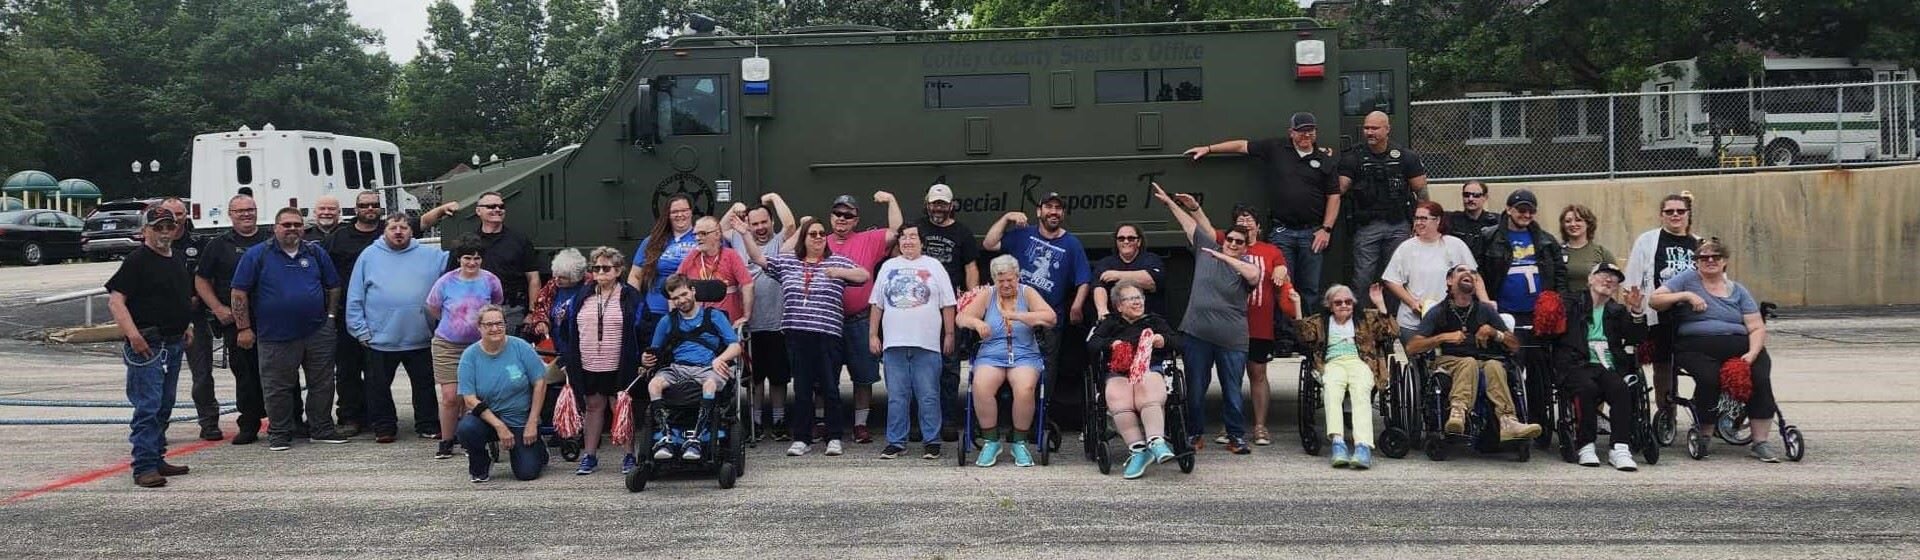 A group of people smiling and holding up their fists in front of a Special Response Team vehicle.